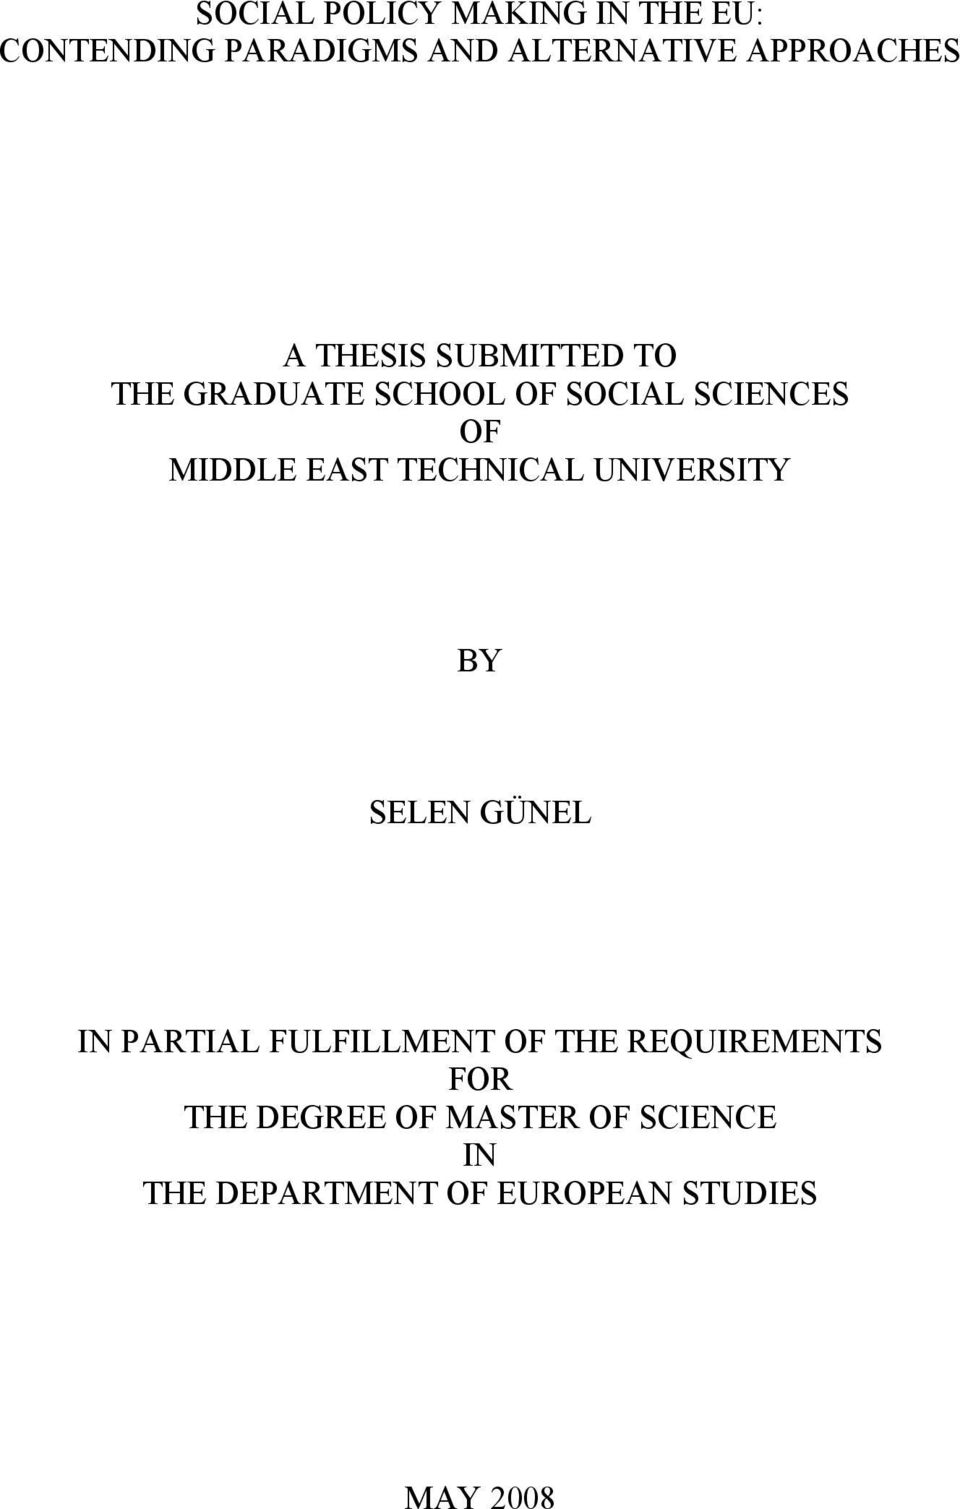 TECHNICAL UNIVERSITY BY SELEN GÜNEL IN PARTIAL FULFILLMENT OF THE REQUIREMENTS